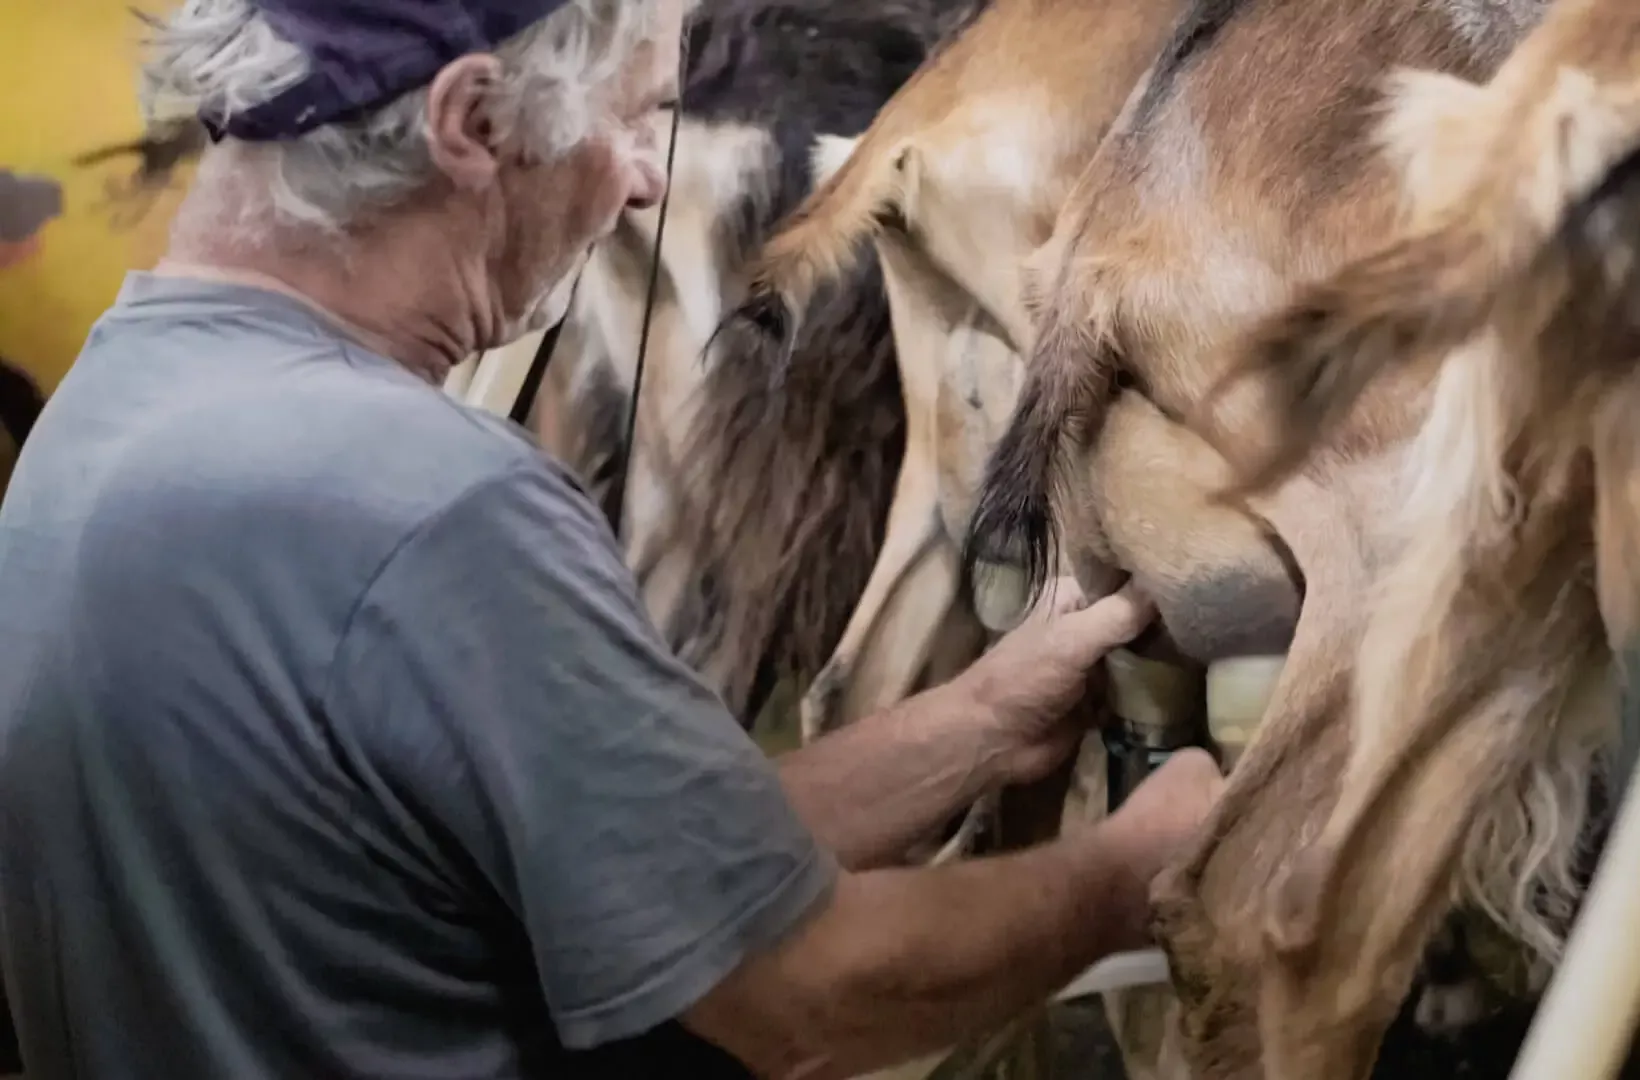 Farmer Daniel Beuret milking his goats before delivering the milk to the Fromagerie de Martigny.